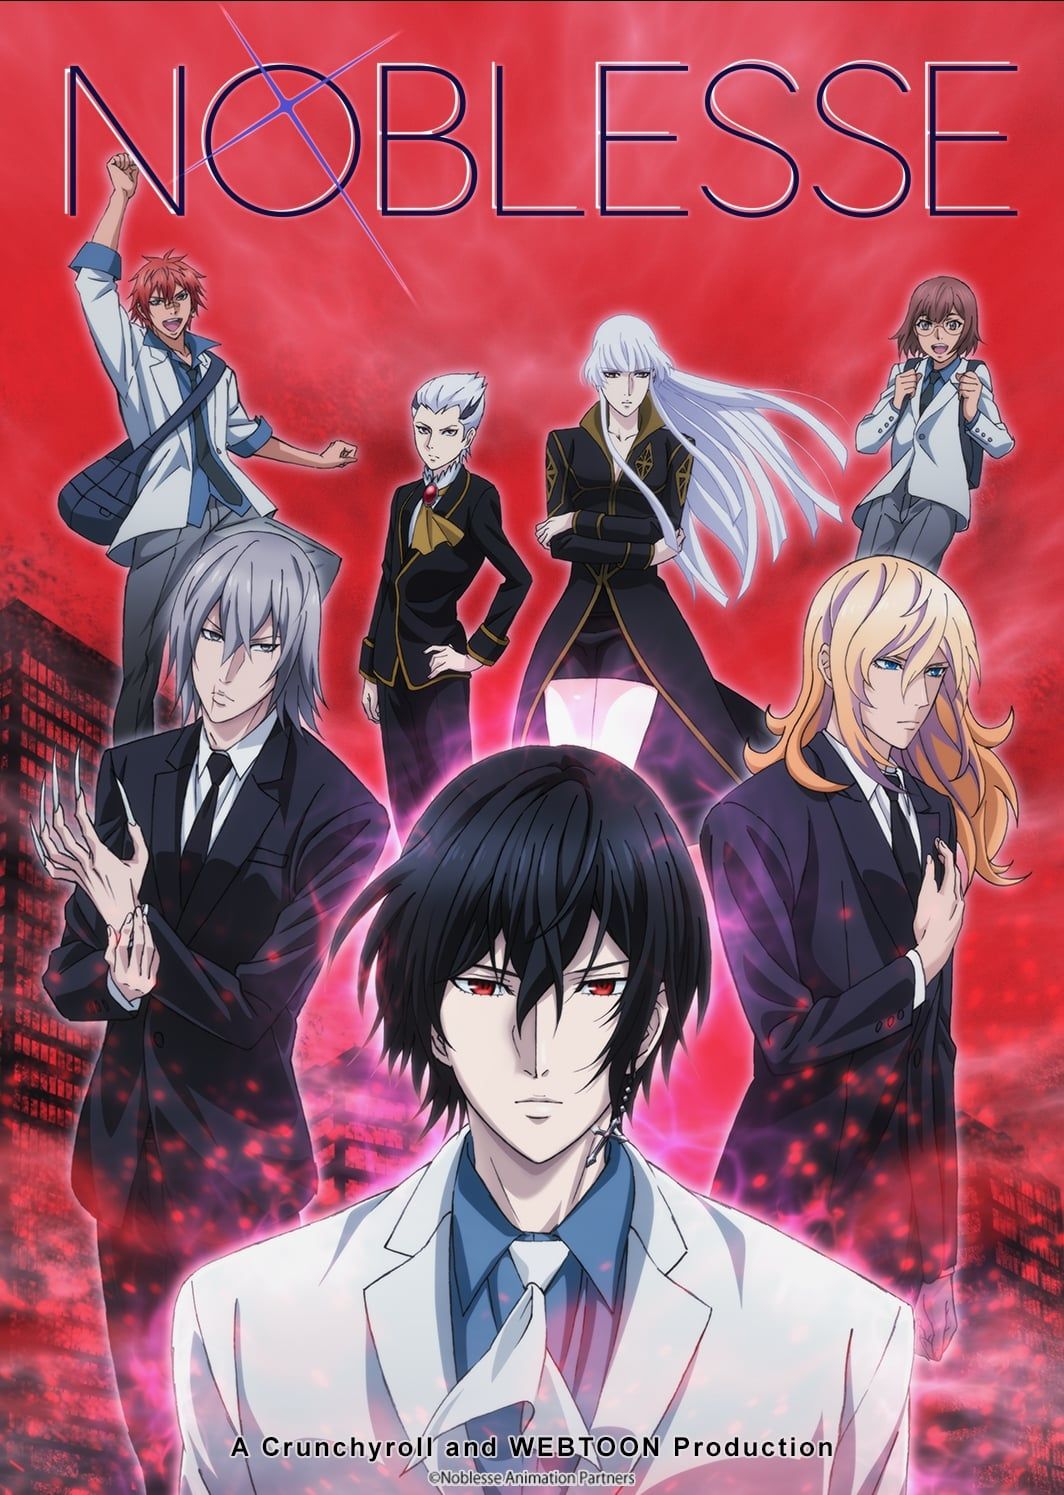 Watch Noblesse Streaming Online - Yidio